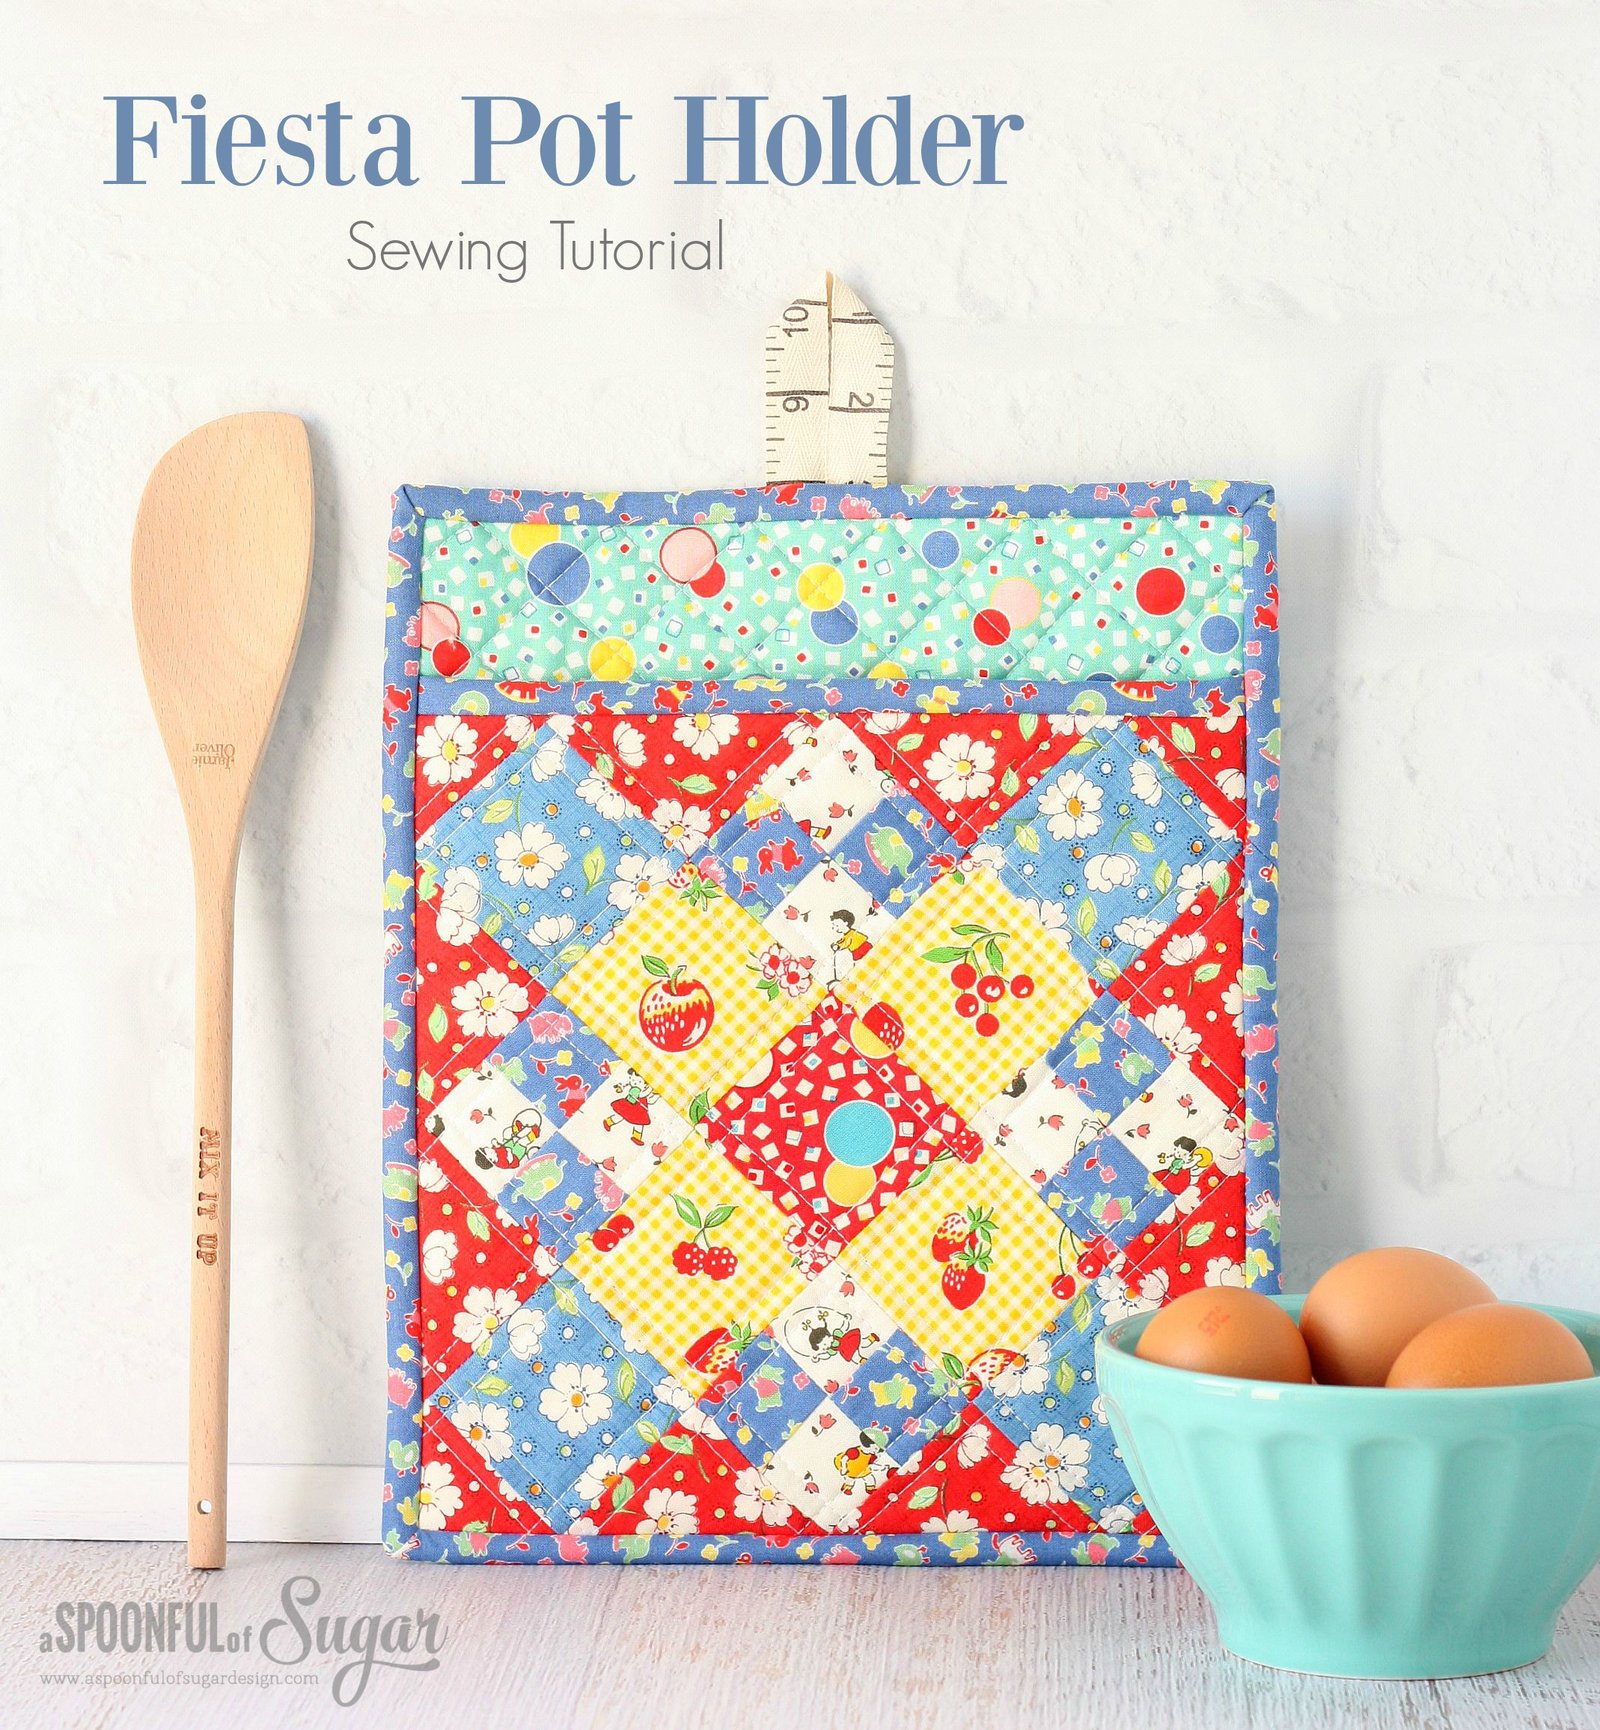 Fiesta Pot Holder Sewing Tutorial by A Spoonful of Sugar